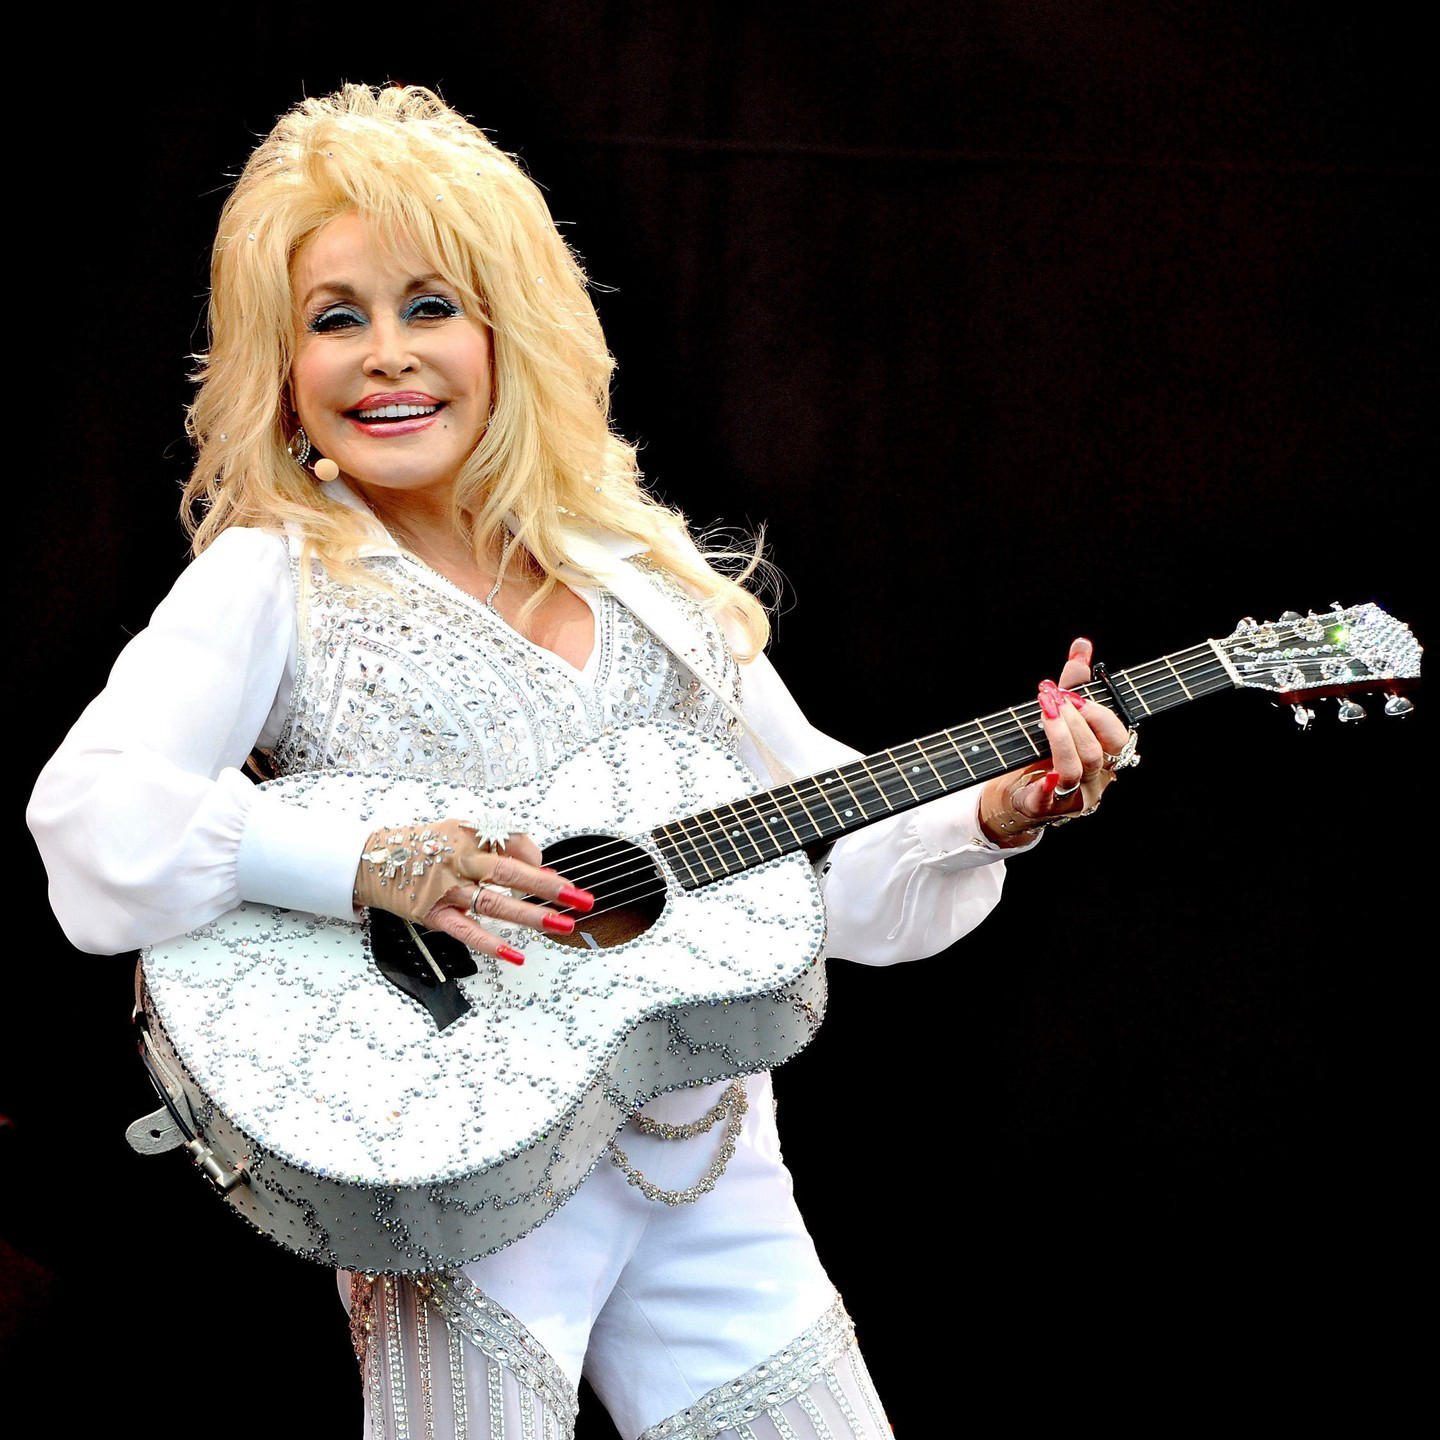 Vanities - Dolly Parton didn't mean to “stir up any controversy” with her recent entrée into the Roc